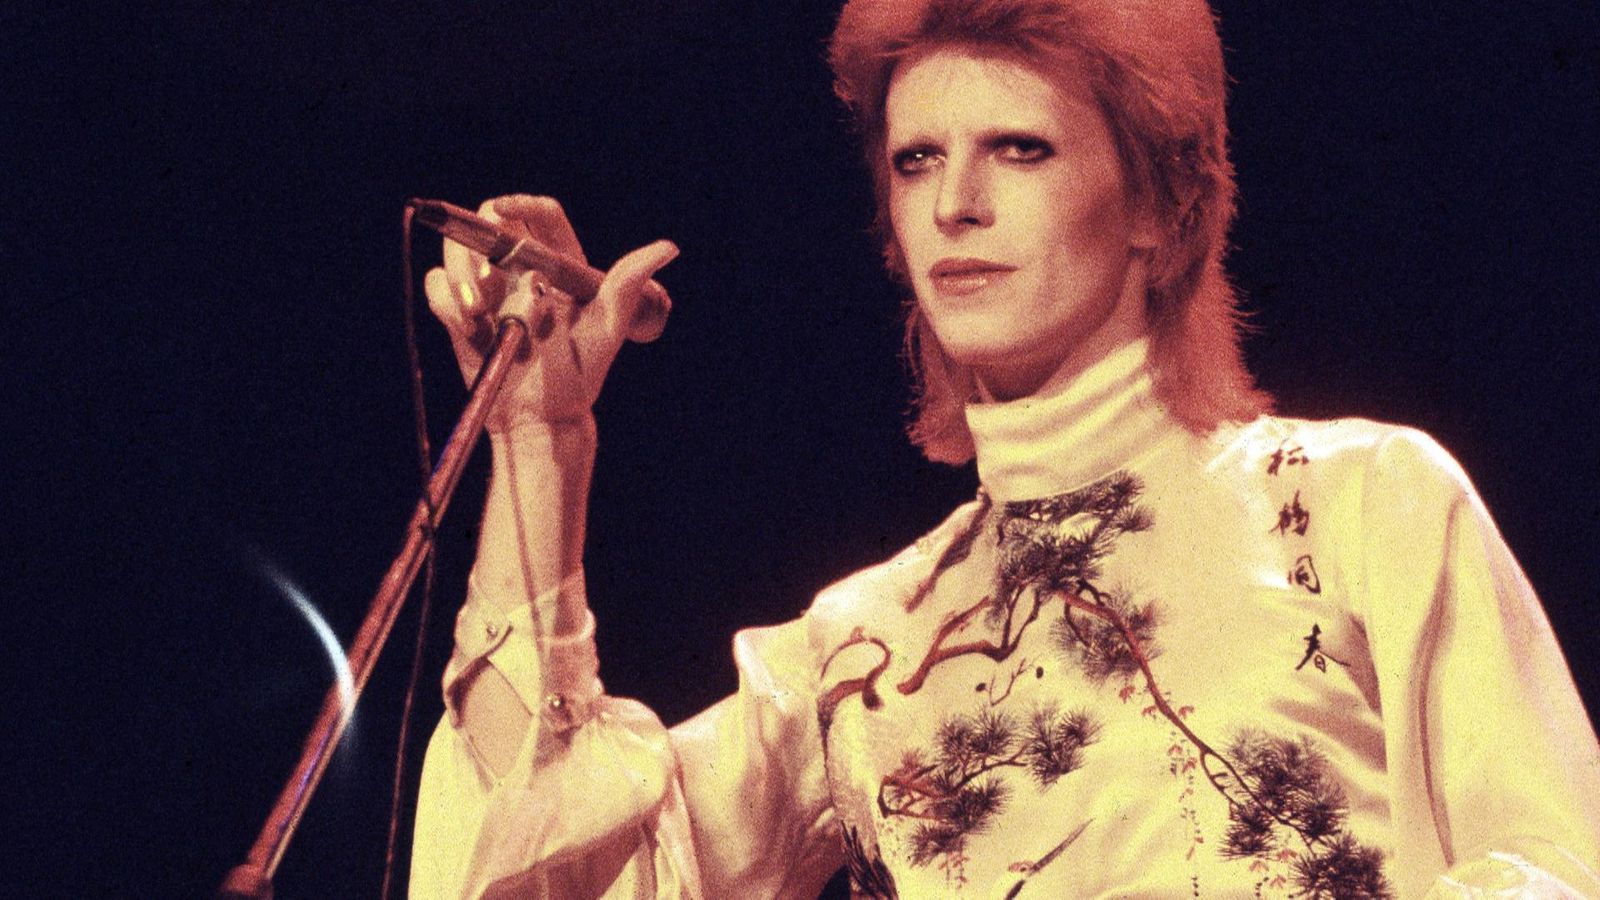 David Bowie named Britain's most influential artist of past half-century